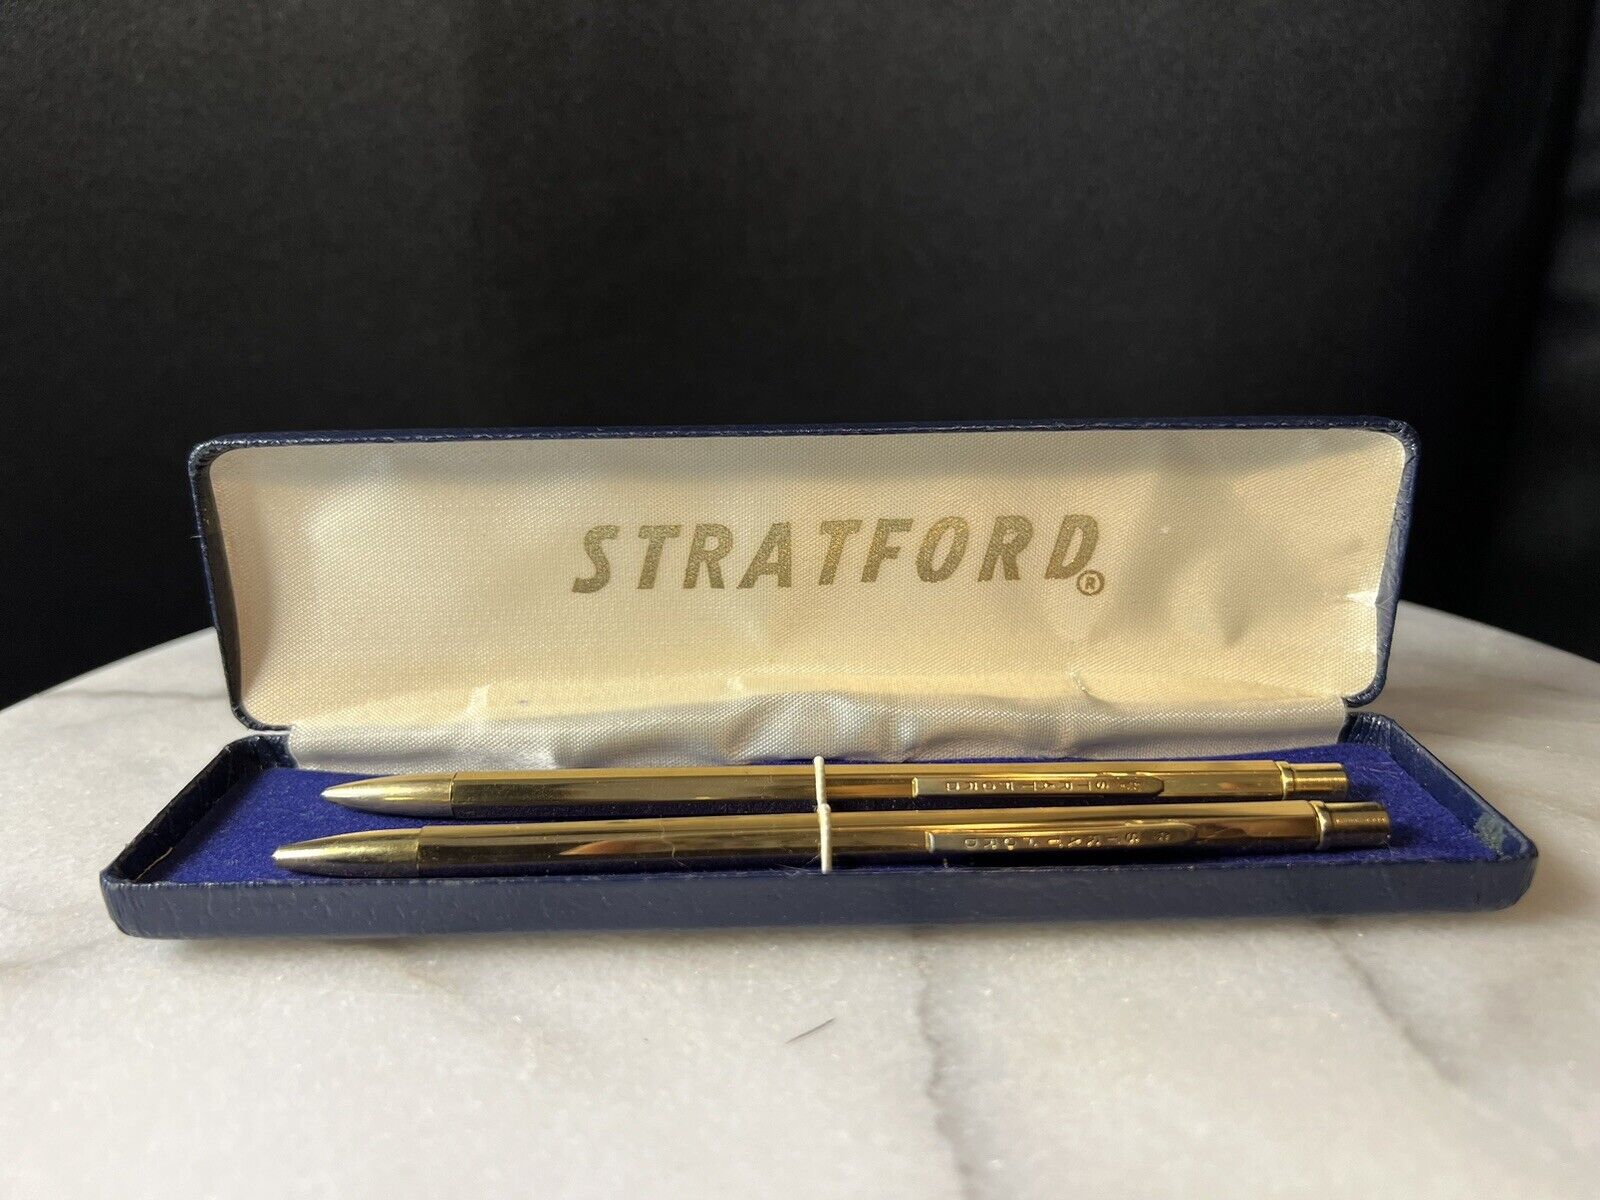 VINTAGE GOLD COLORED STRATFORD PEN AND MECHANICAL PENCIL SET IN BOX